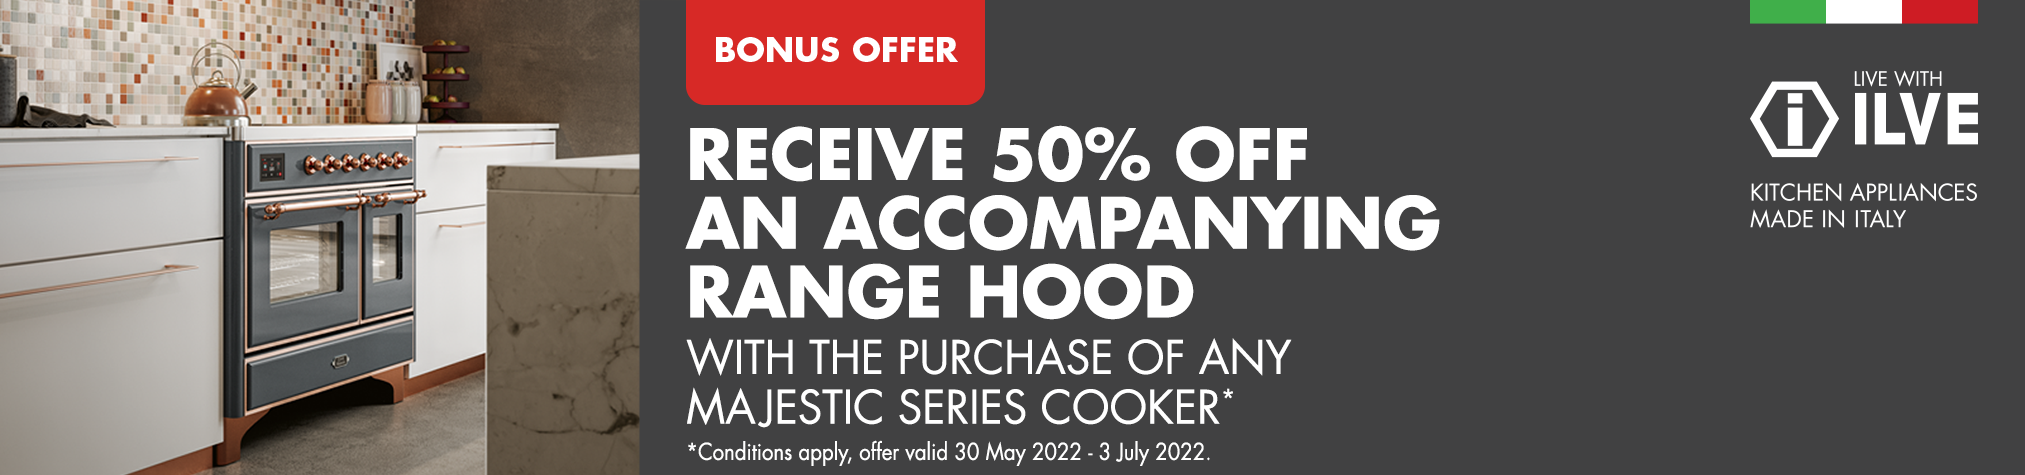 Receive 50% off an accompanying Ilve Rangehood with the purchase of any Majestic Series Cooker